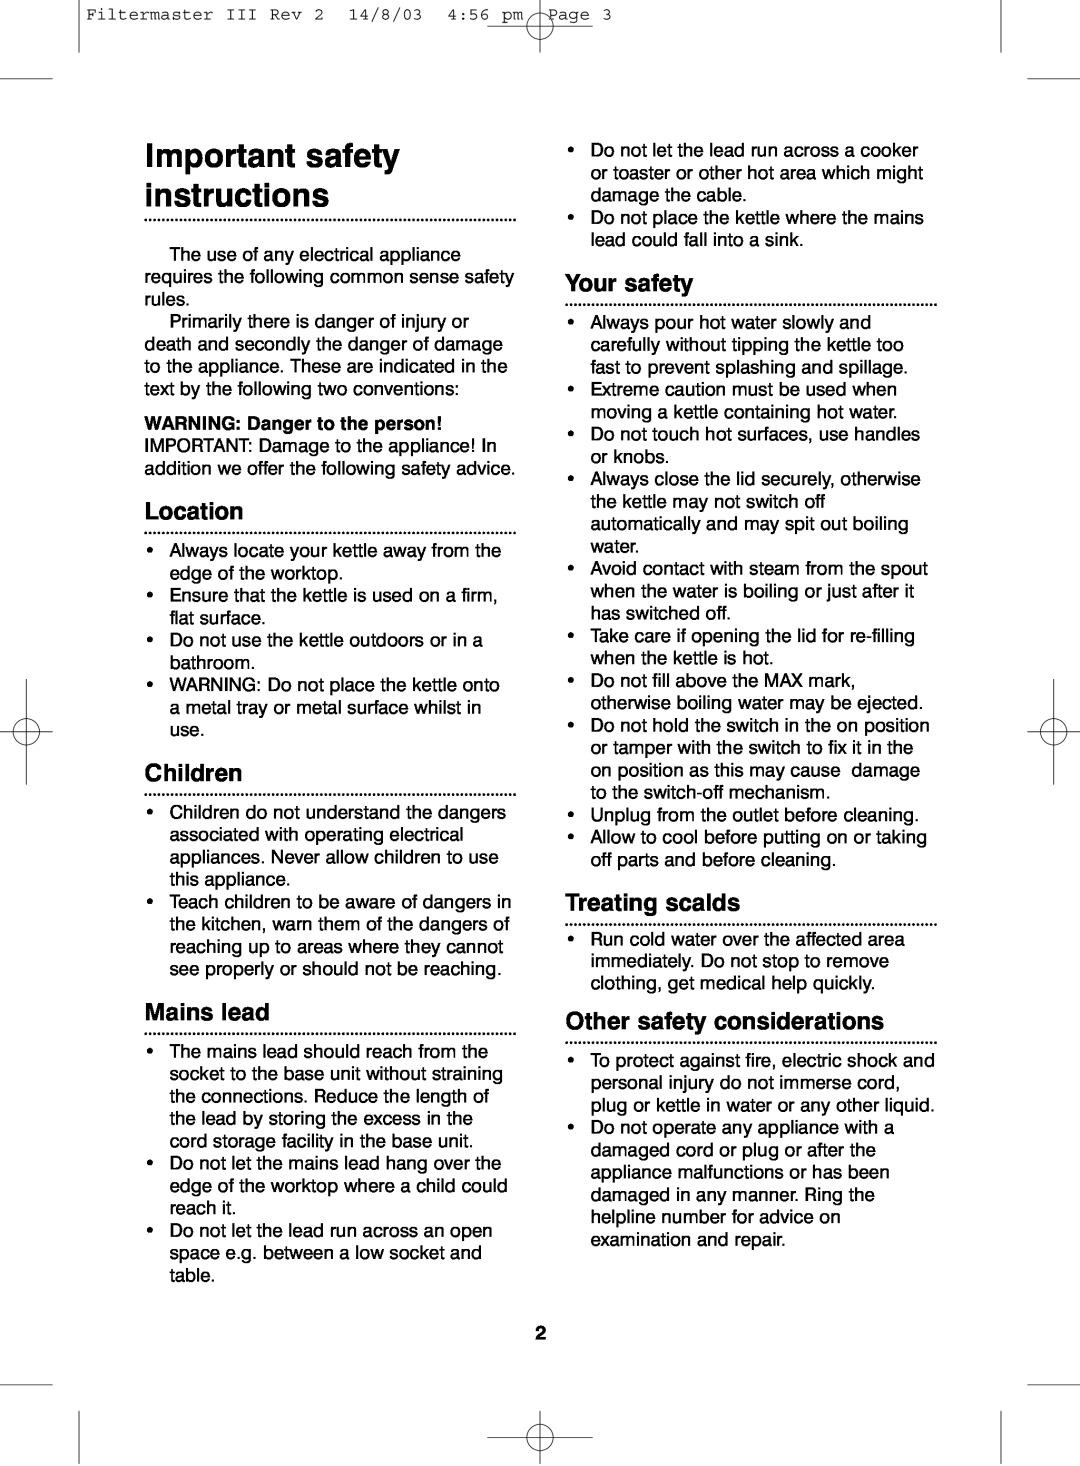 Morphy Richards III manual Important safety instructions, WARNING Danger to the person, Location, Children, Mains lead 